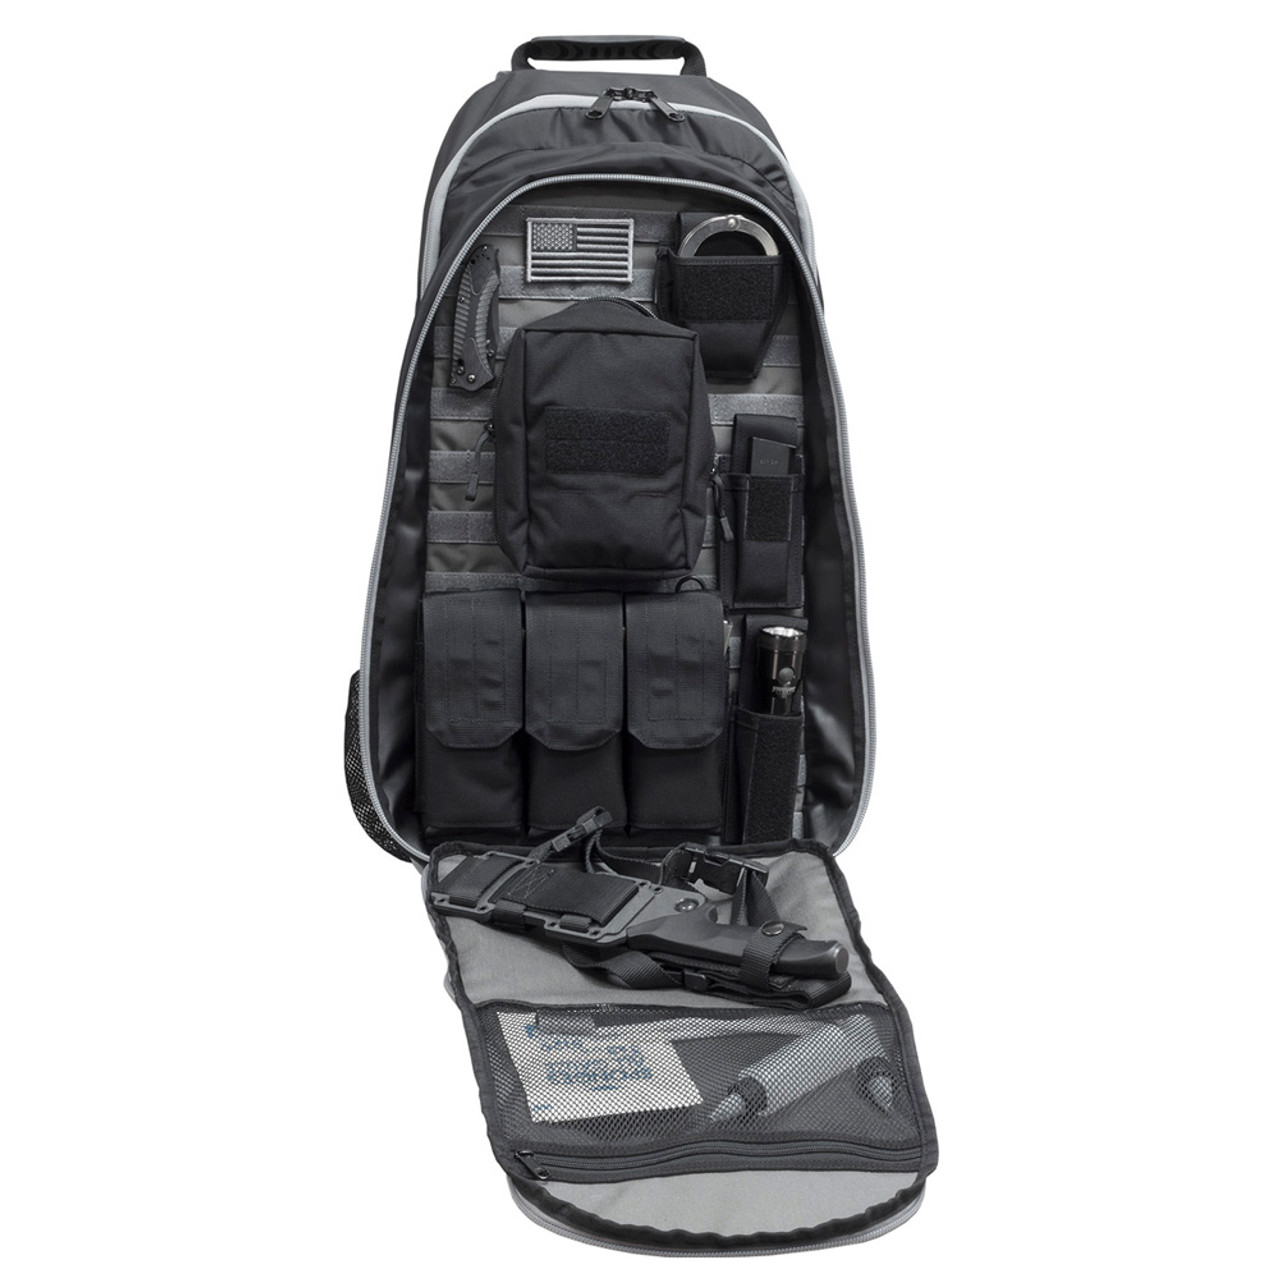 ELITE SURVIVAL SYSTEMS Stealth Covert Operations Rifle Backpack 7725